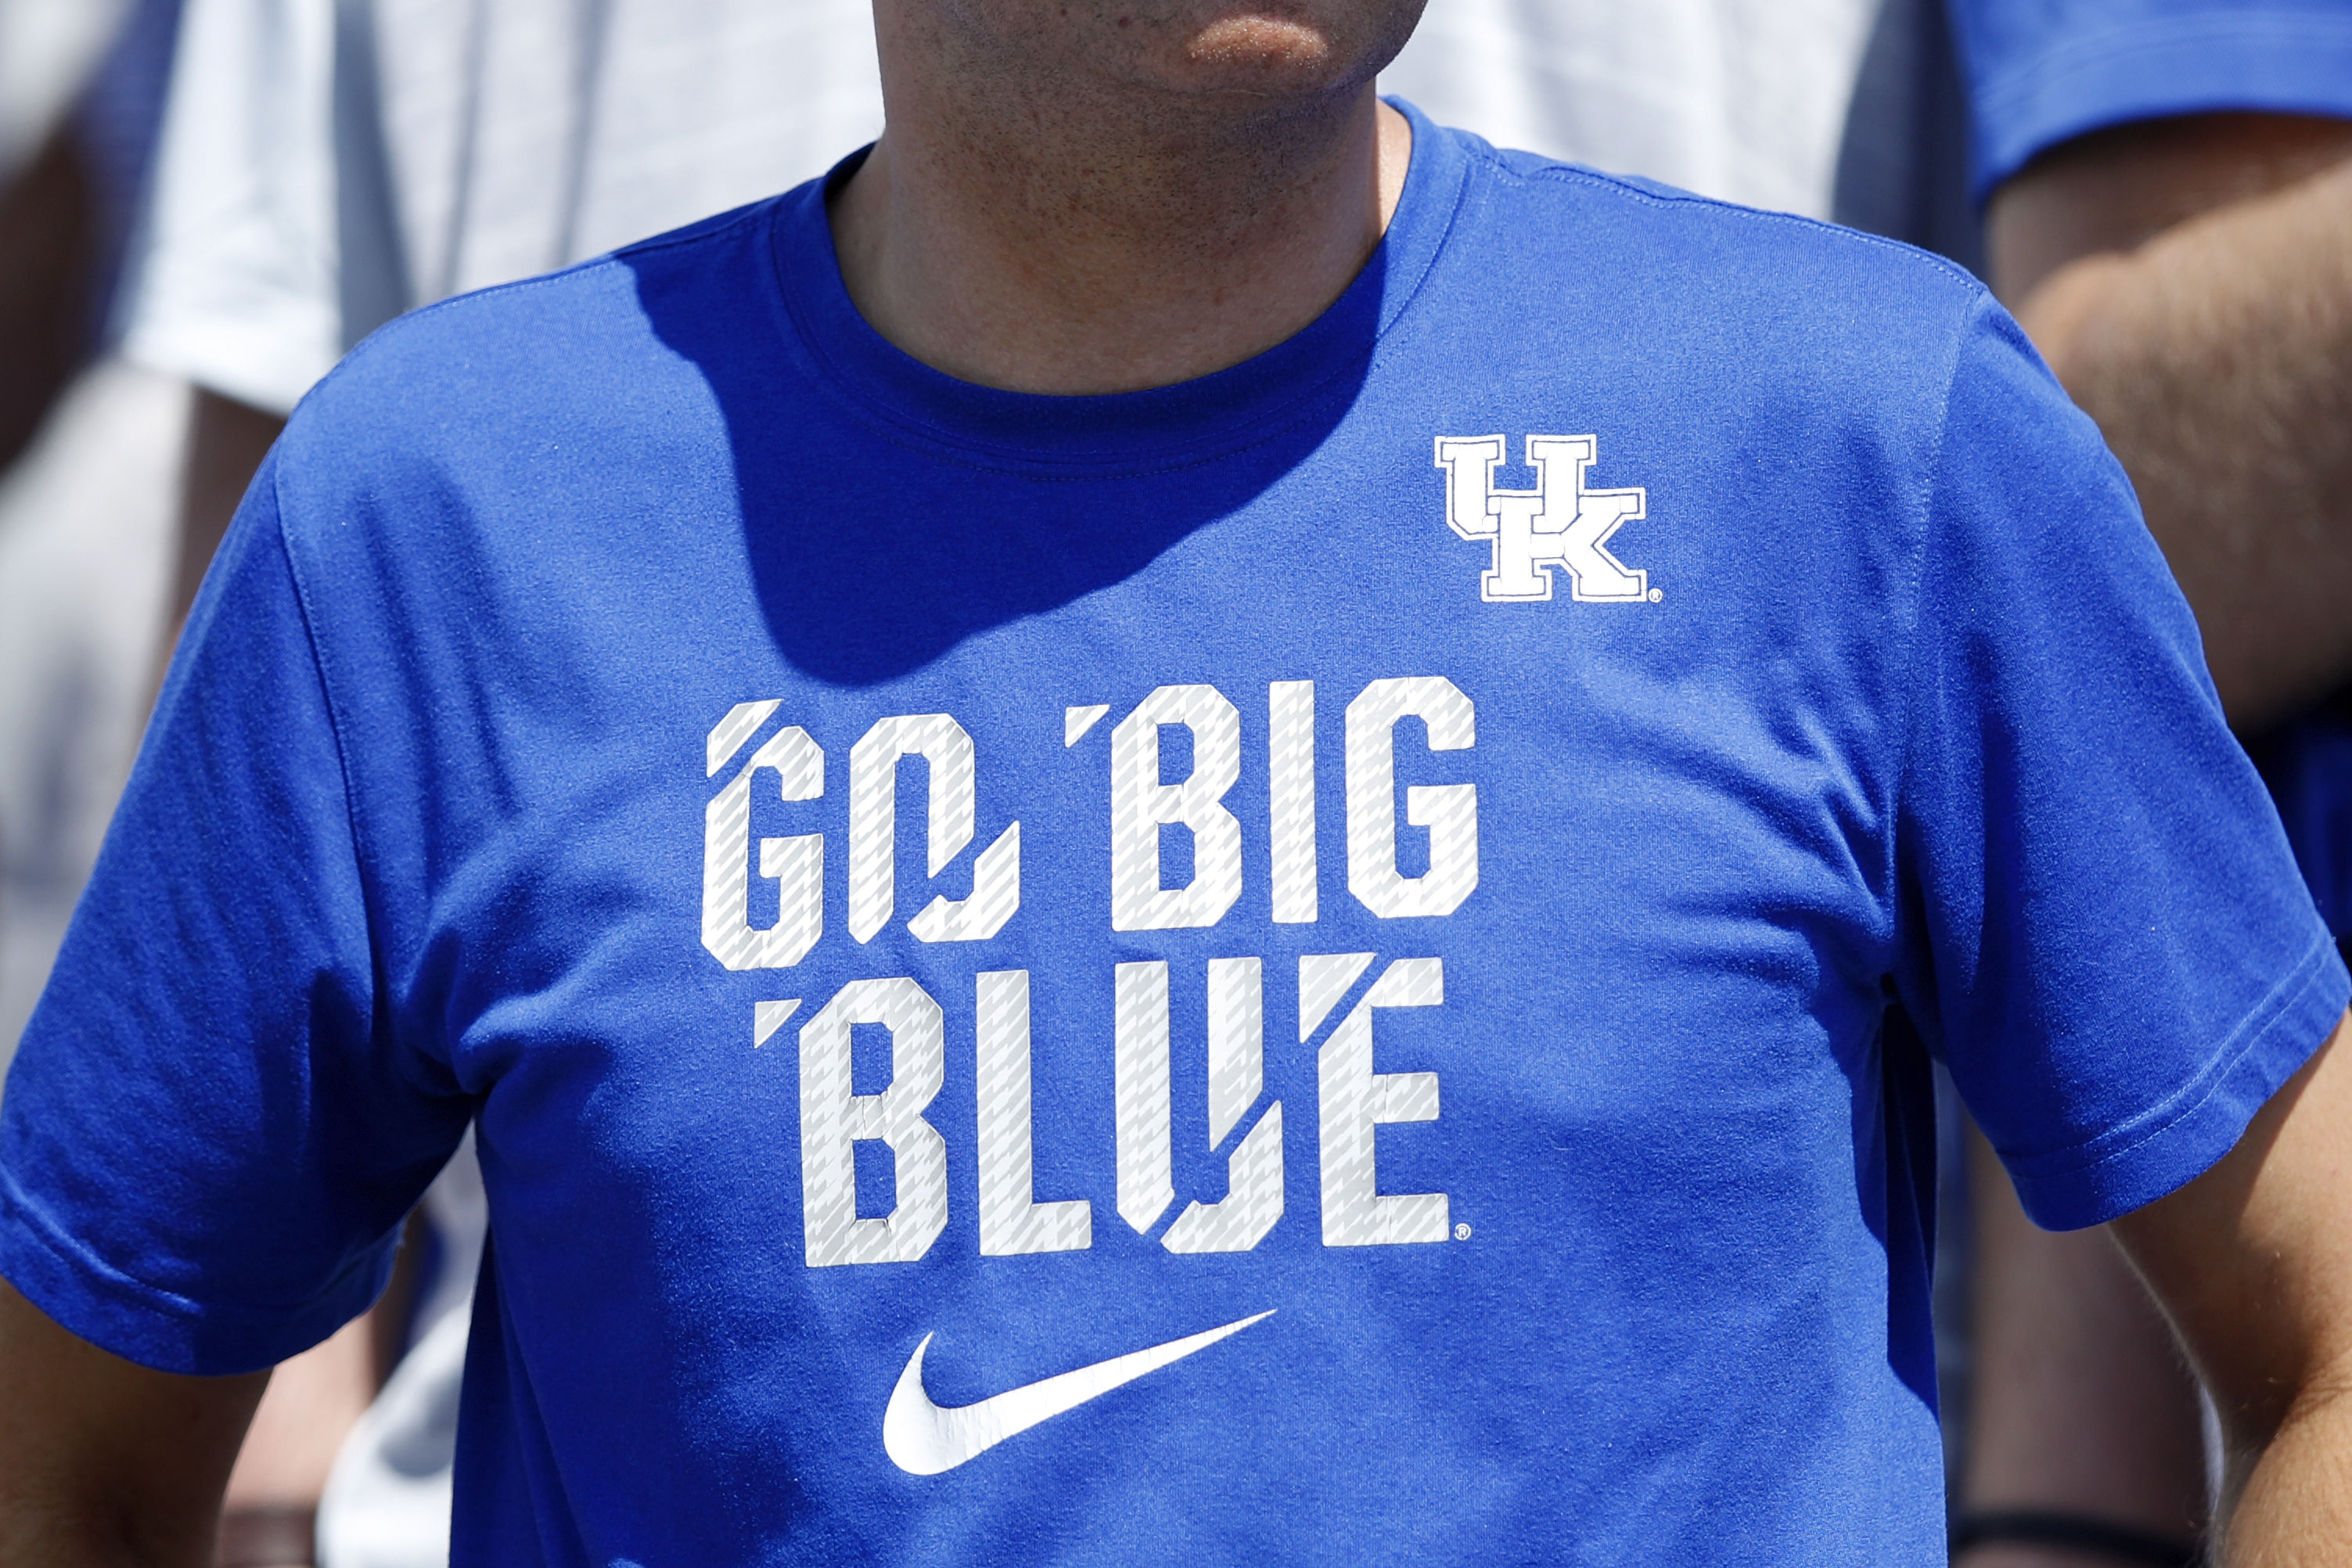 Lunatic Kentucky Fan Goes On Wild Rant About Being Cool With Millions